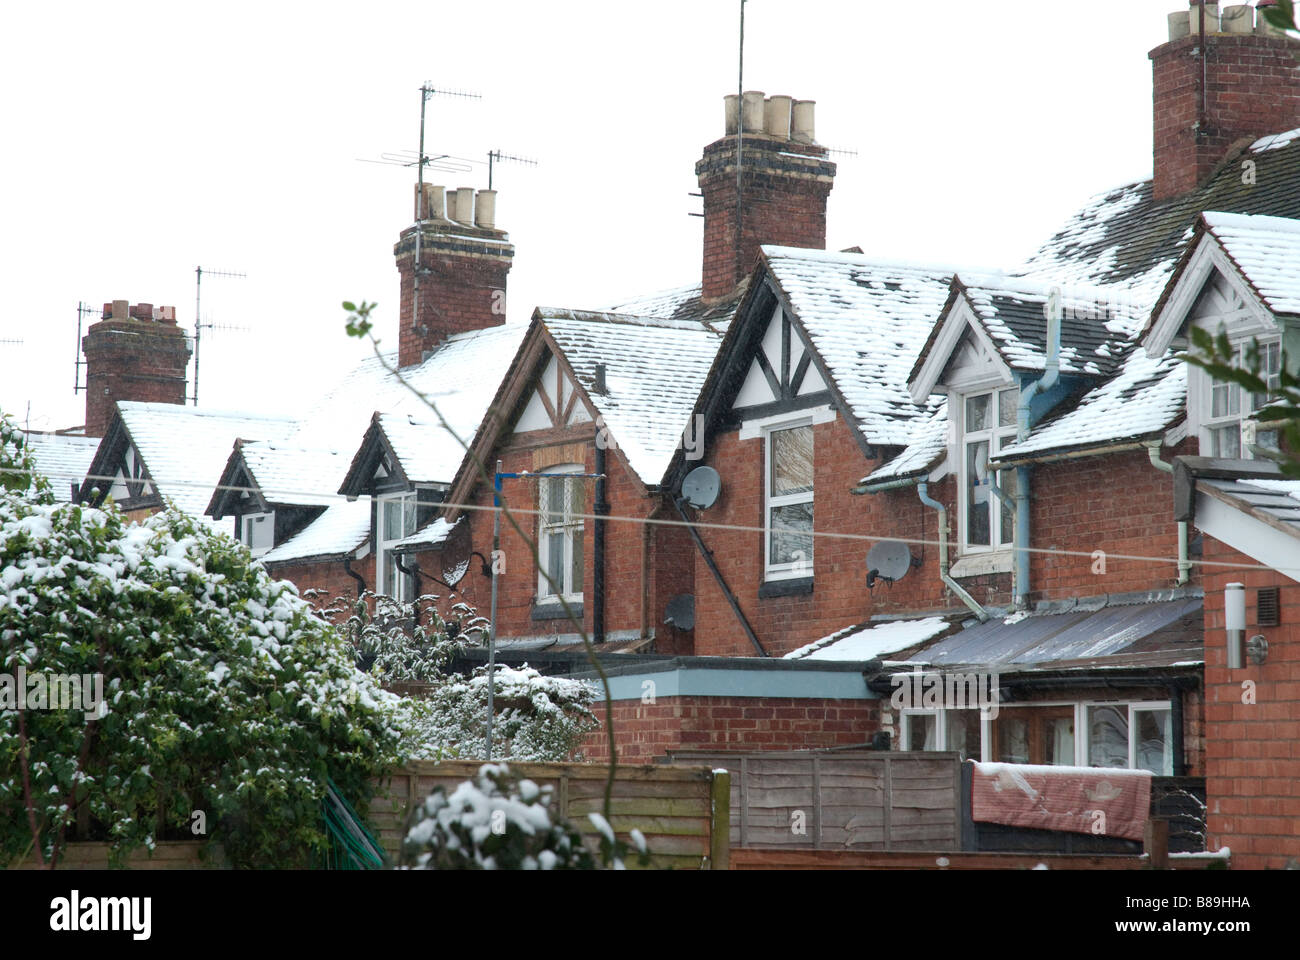 Rooftops of terraced houses in the snow, Tenbury Wells, Worcestershire Stock Photo